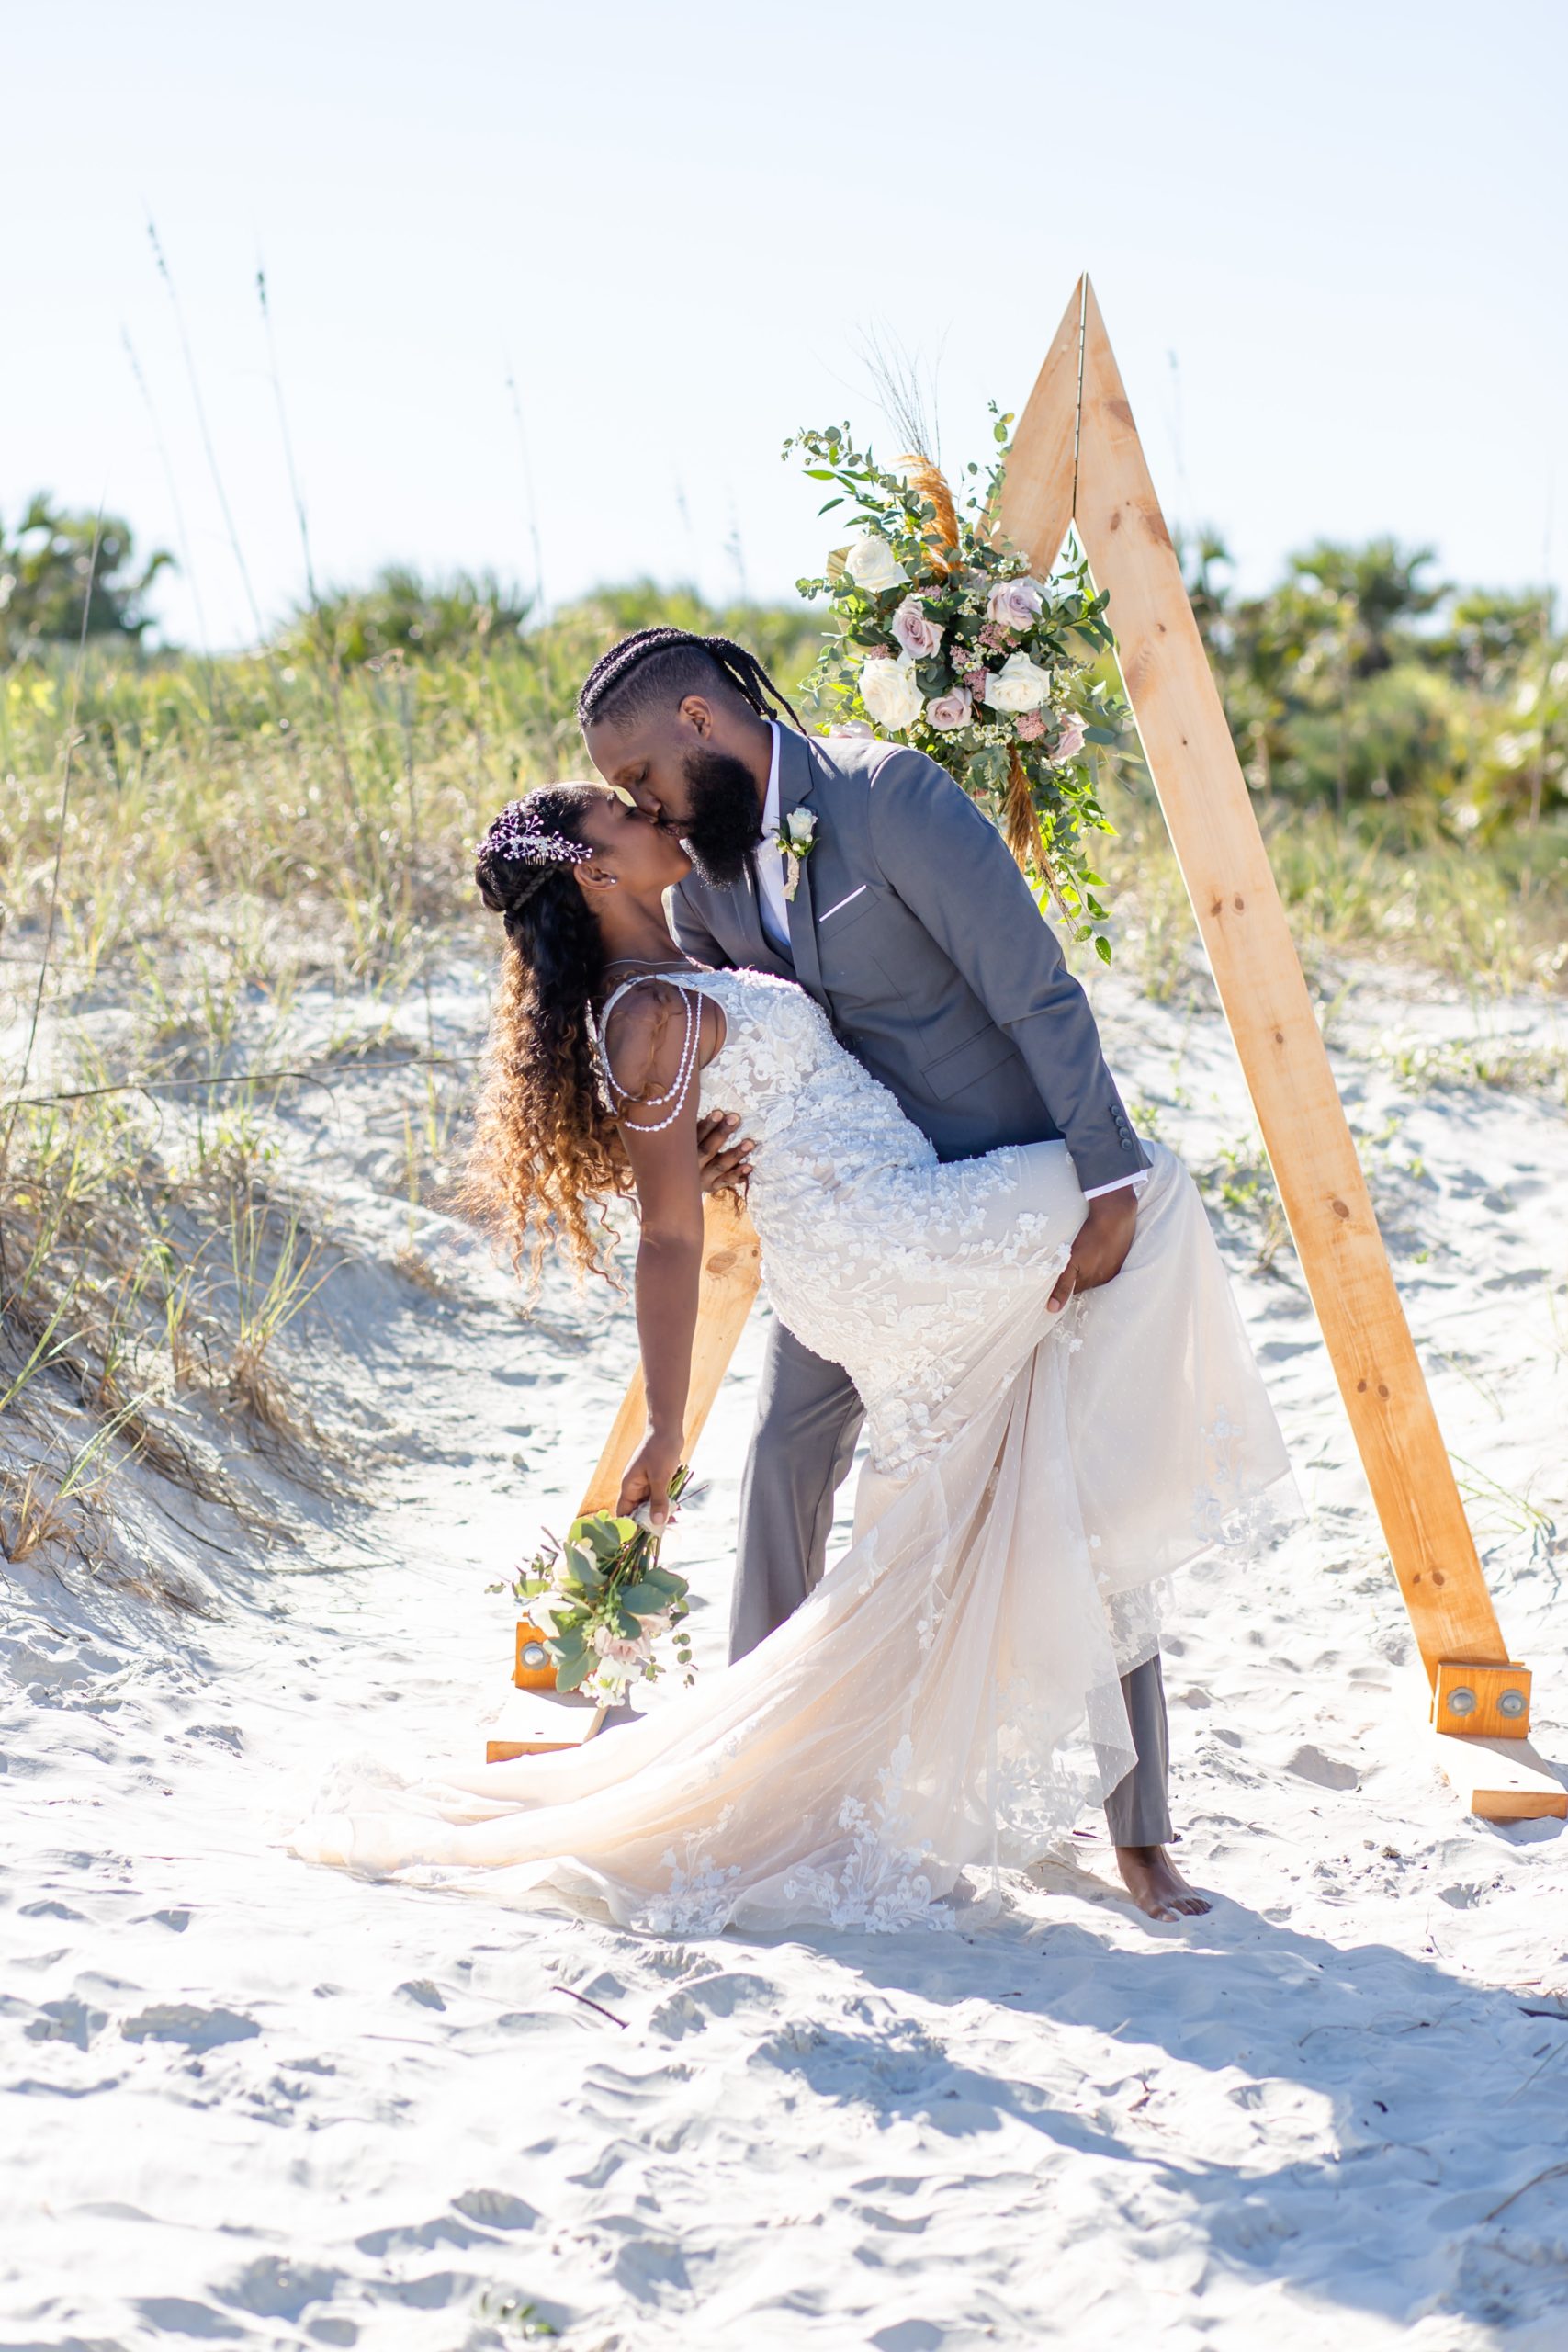 Bride & Groom kissing under wooden ceremony triangle arch with floral accents on the beach